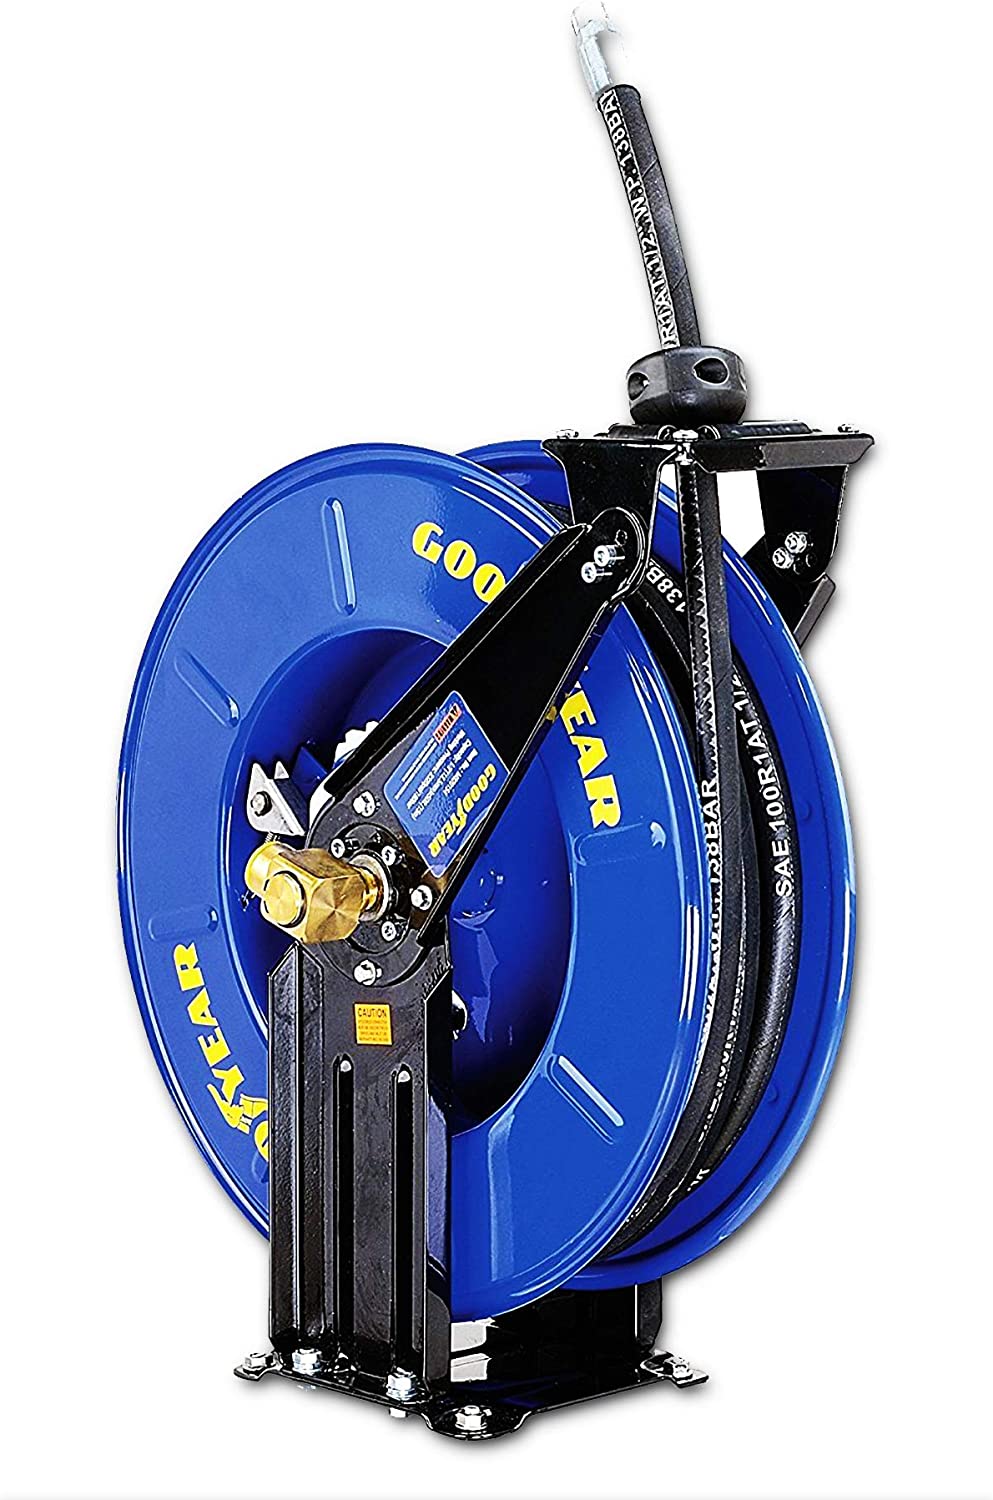 Goodyear Oil Hose Reel Retractable 1/2" Inch x 50' Foot Long Premium Commercial SAE 100R1AT Hose Max 2320 Psi Steel Construction Elite Heavy Duty Industrial Spring Driven Dual Arm and Pedestal